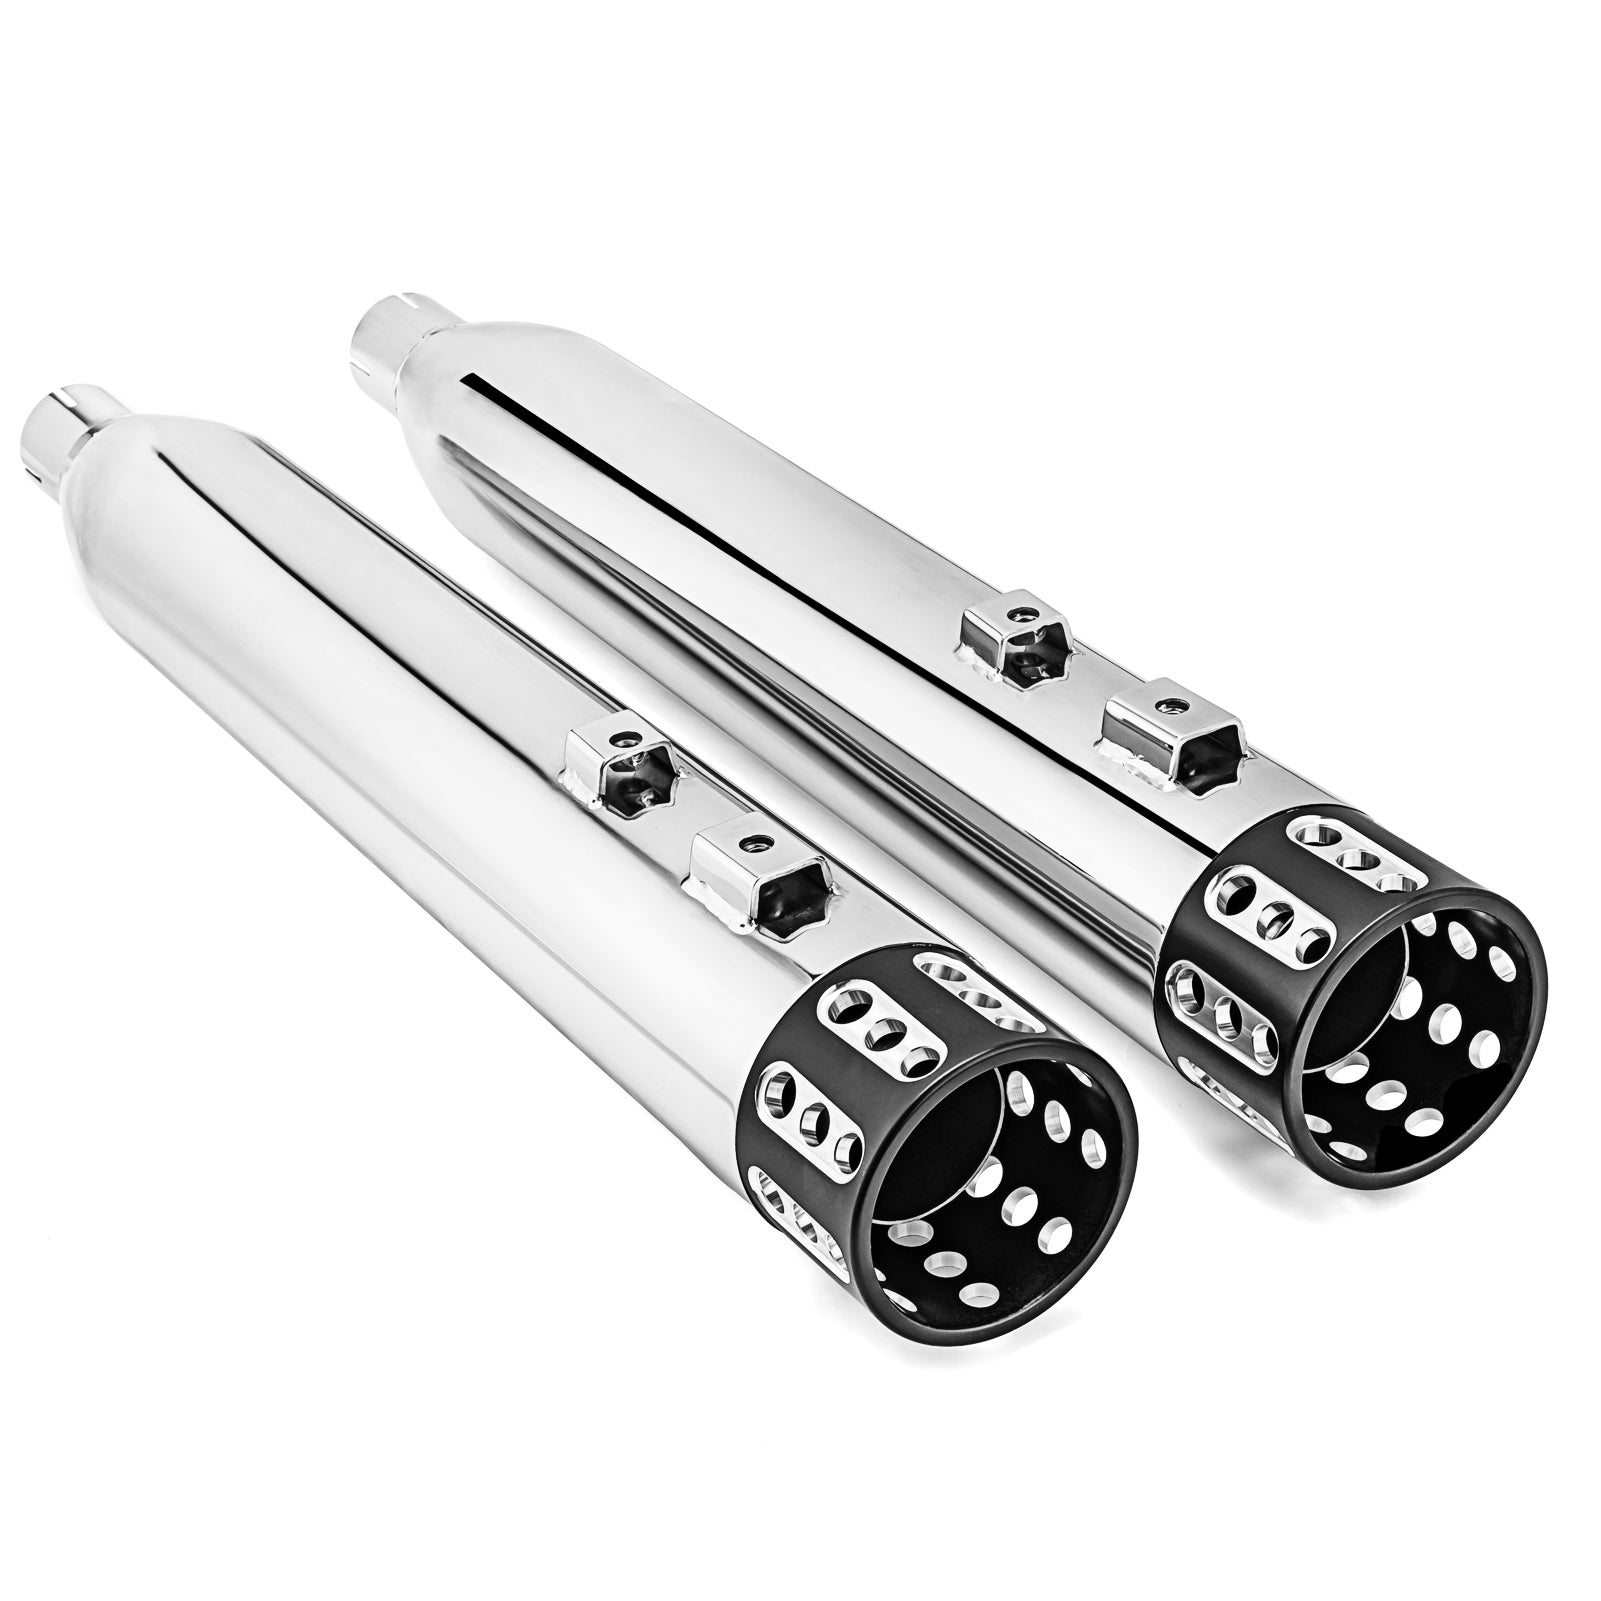 Chrome 4" Megaphone style Slip-On Mufflers Exhaust, Exhaust Pipes For 1995-2016 Harley Davidson Touring-1